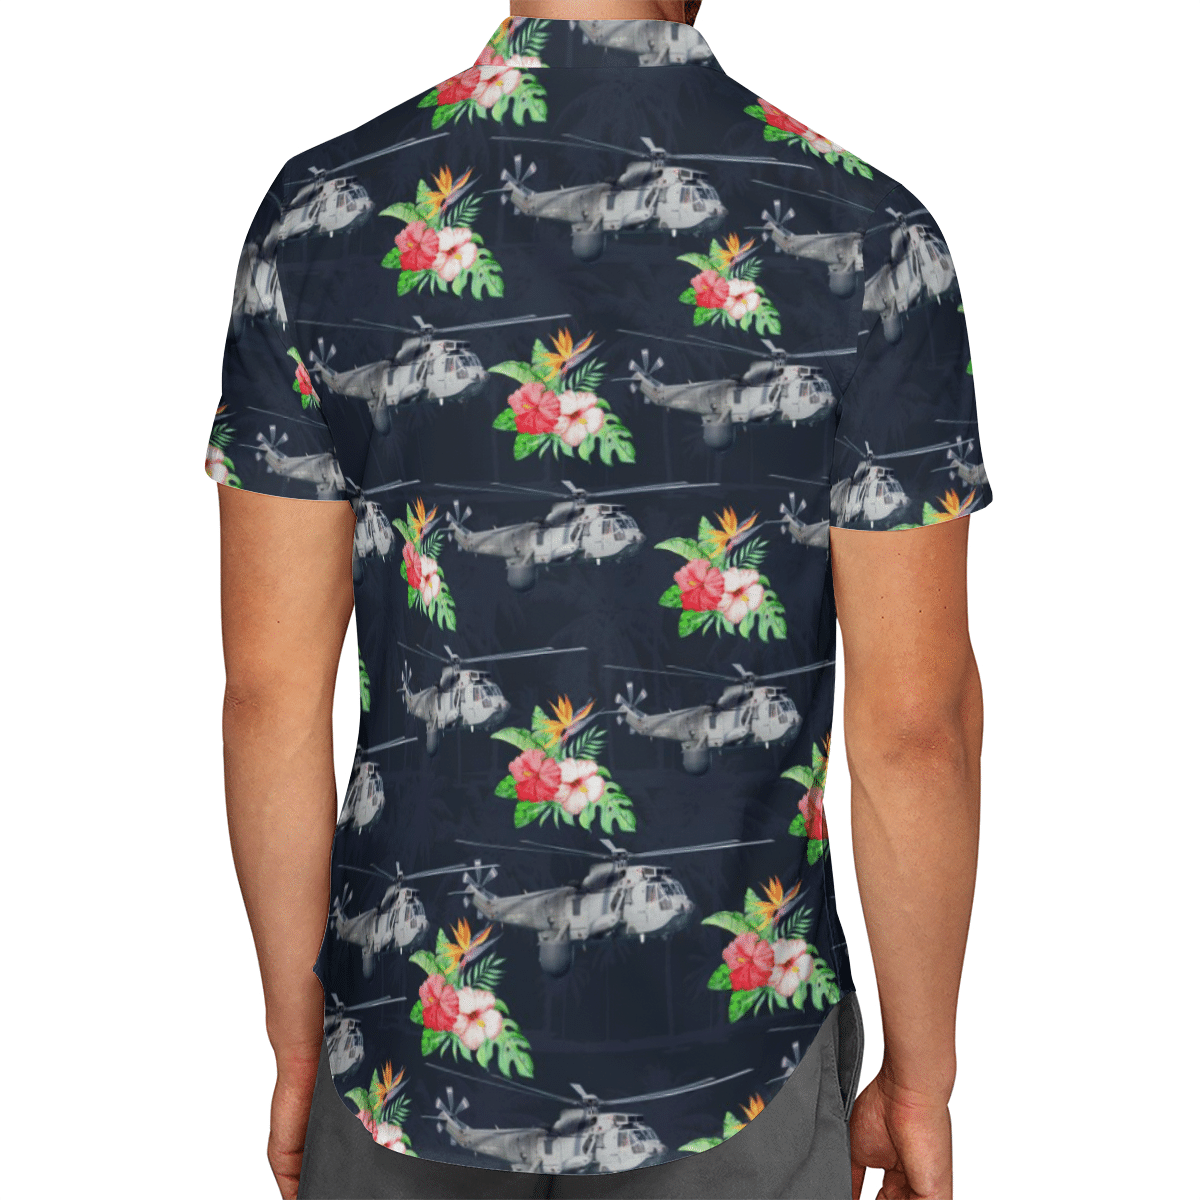 Going to the beach with a quality shirt 122